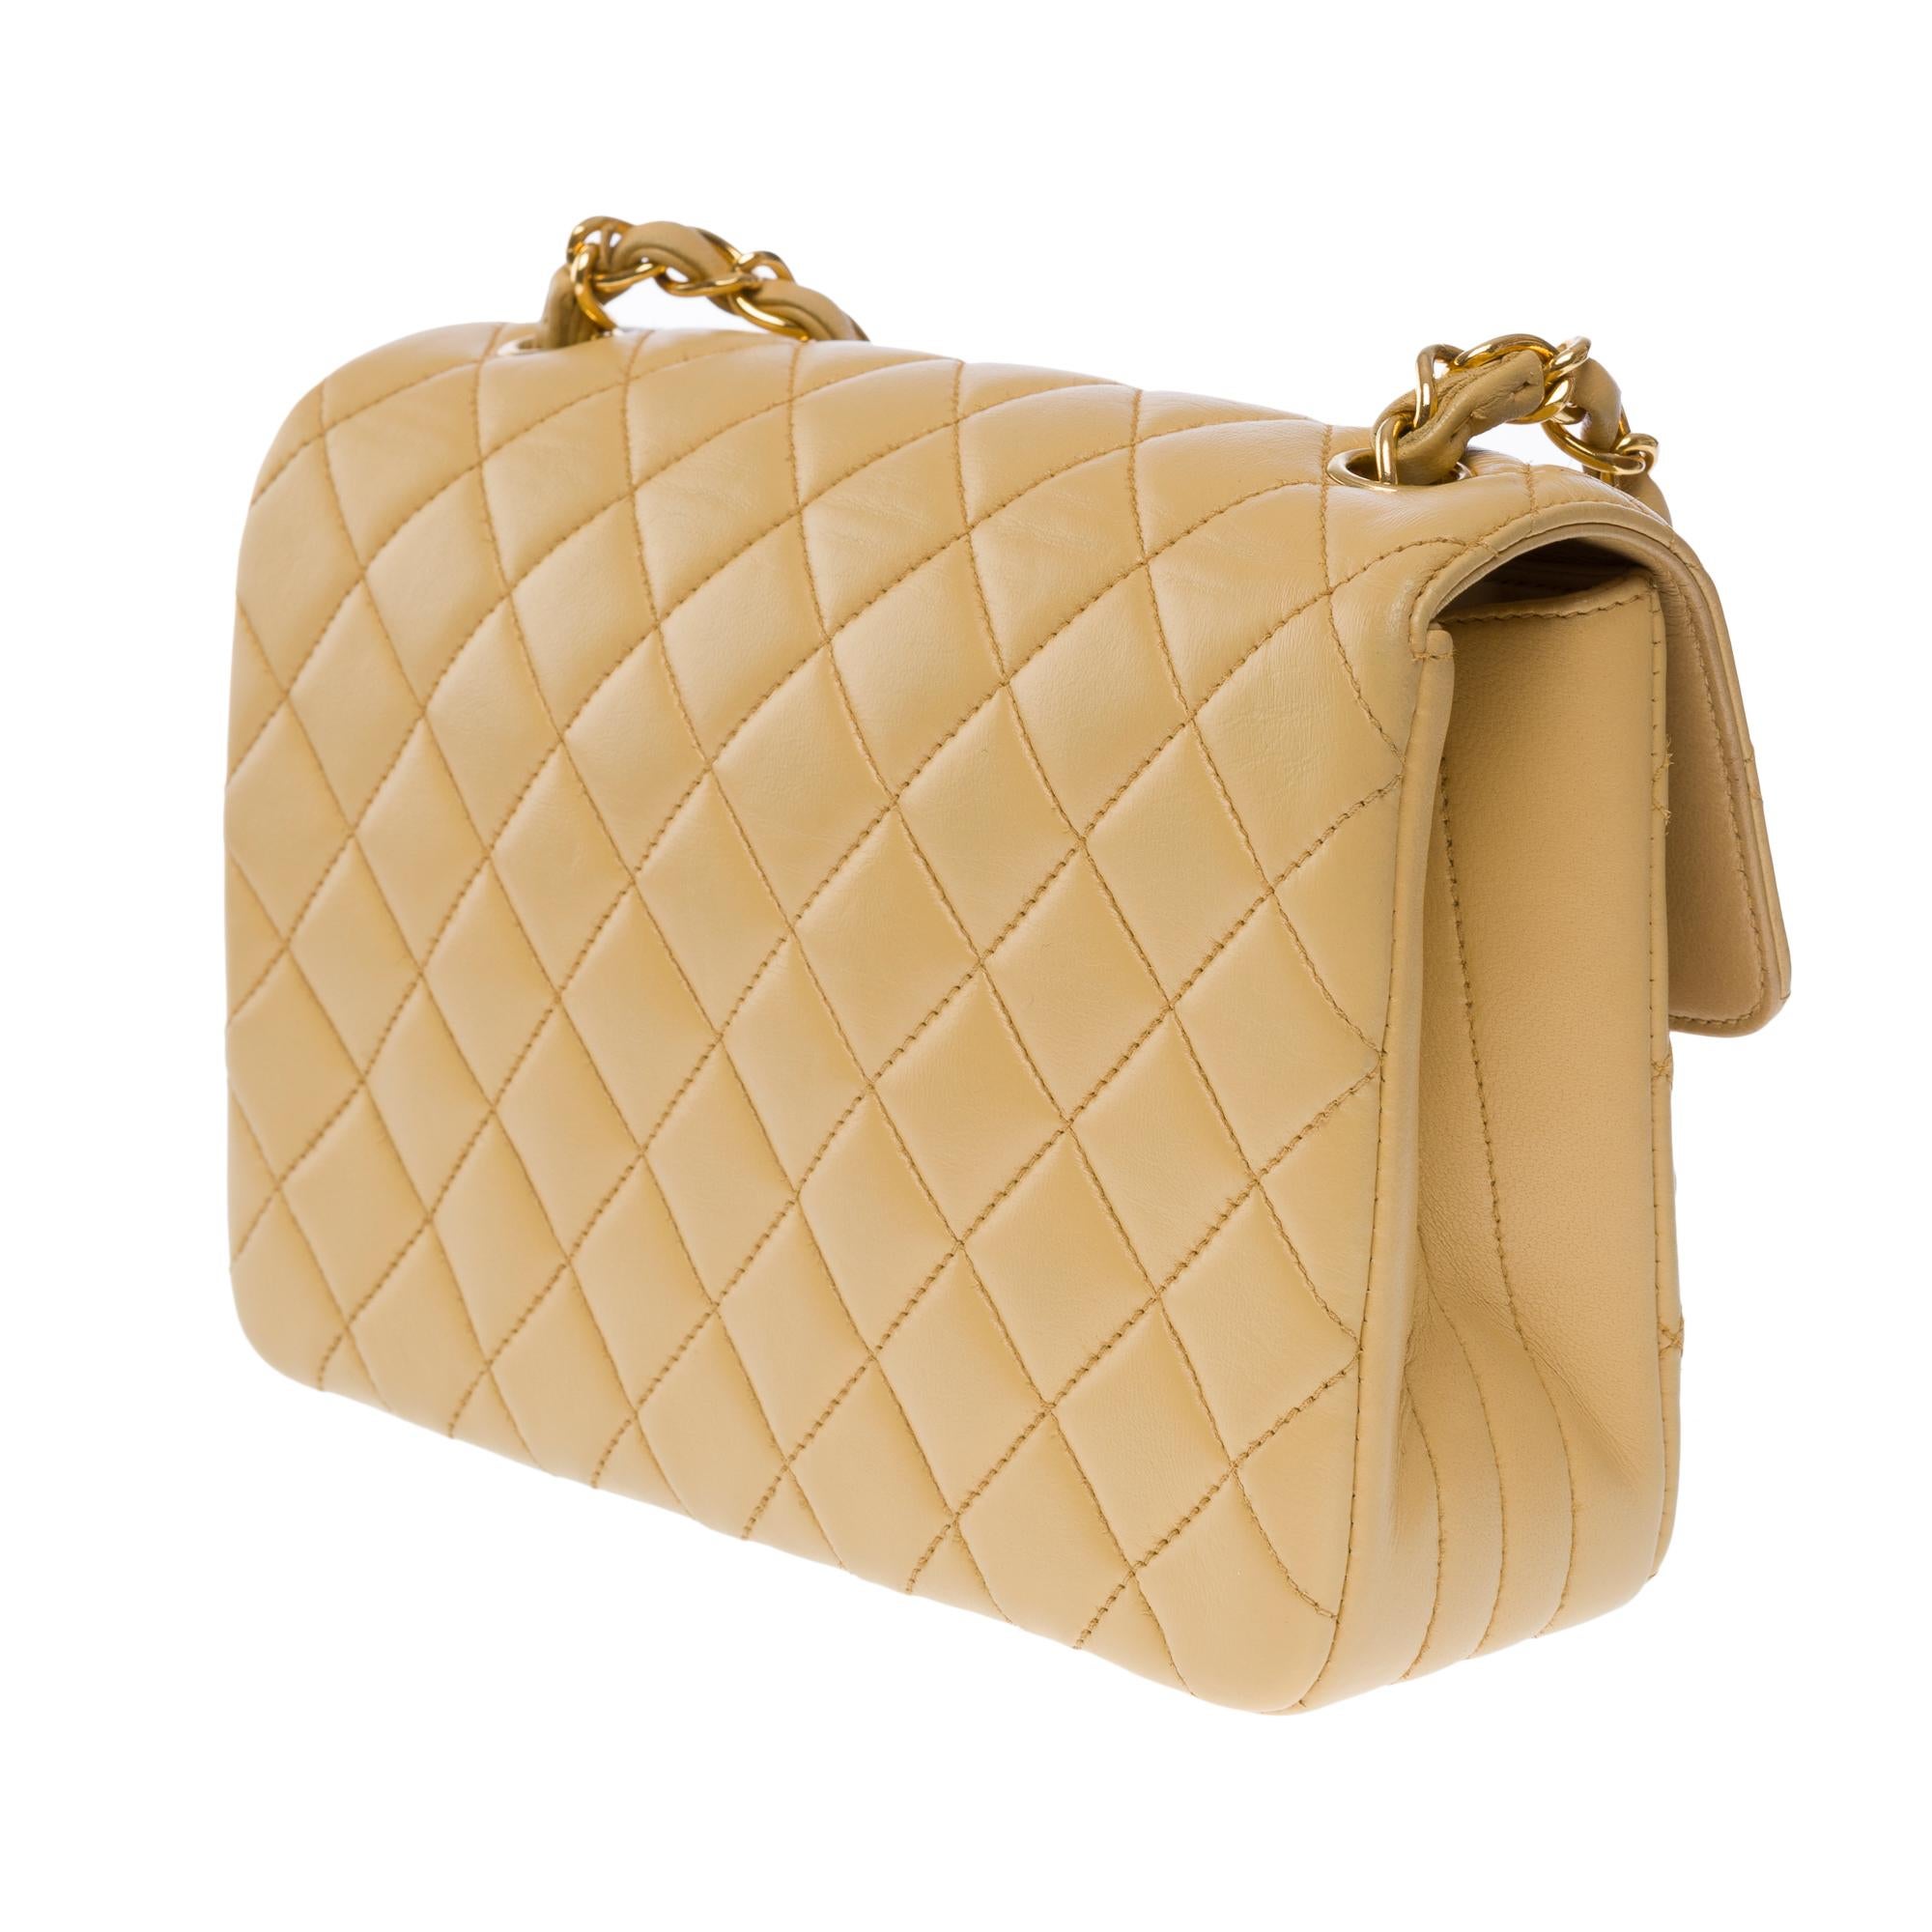 Beautiful Chanel Timeless Mini shoulder Flap bag in beige quilted lambskin, GHW For Sale 1